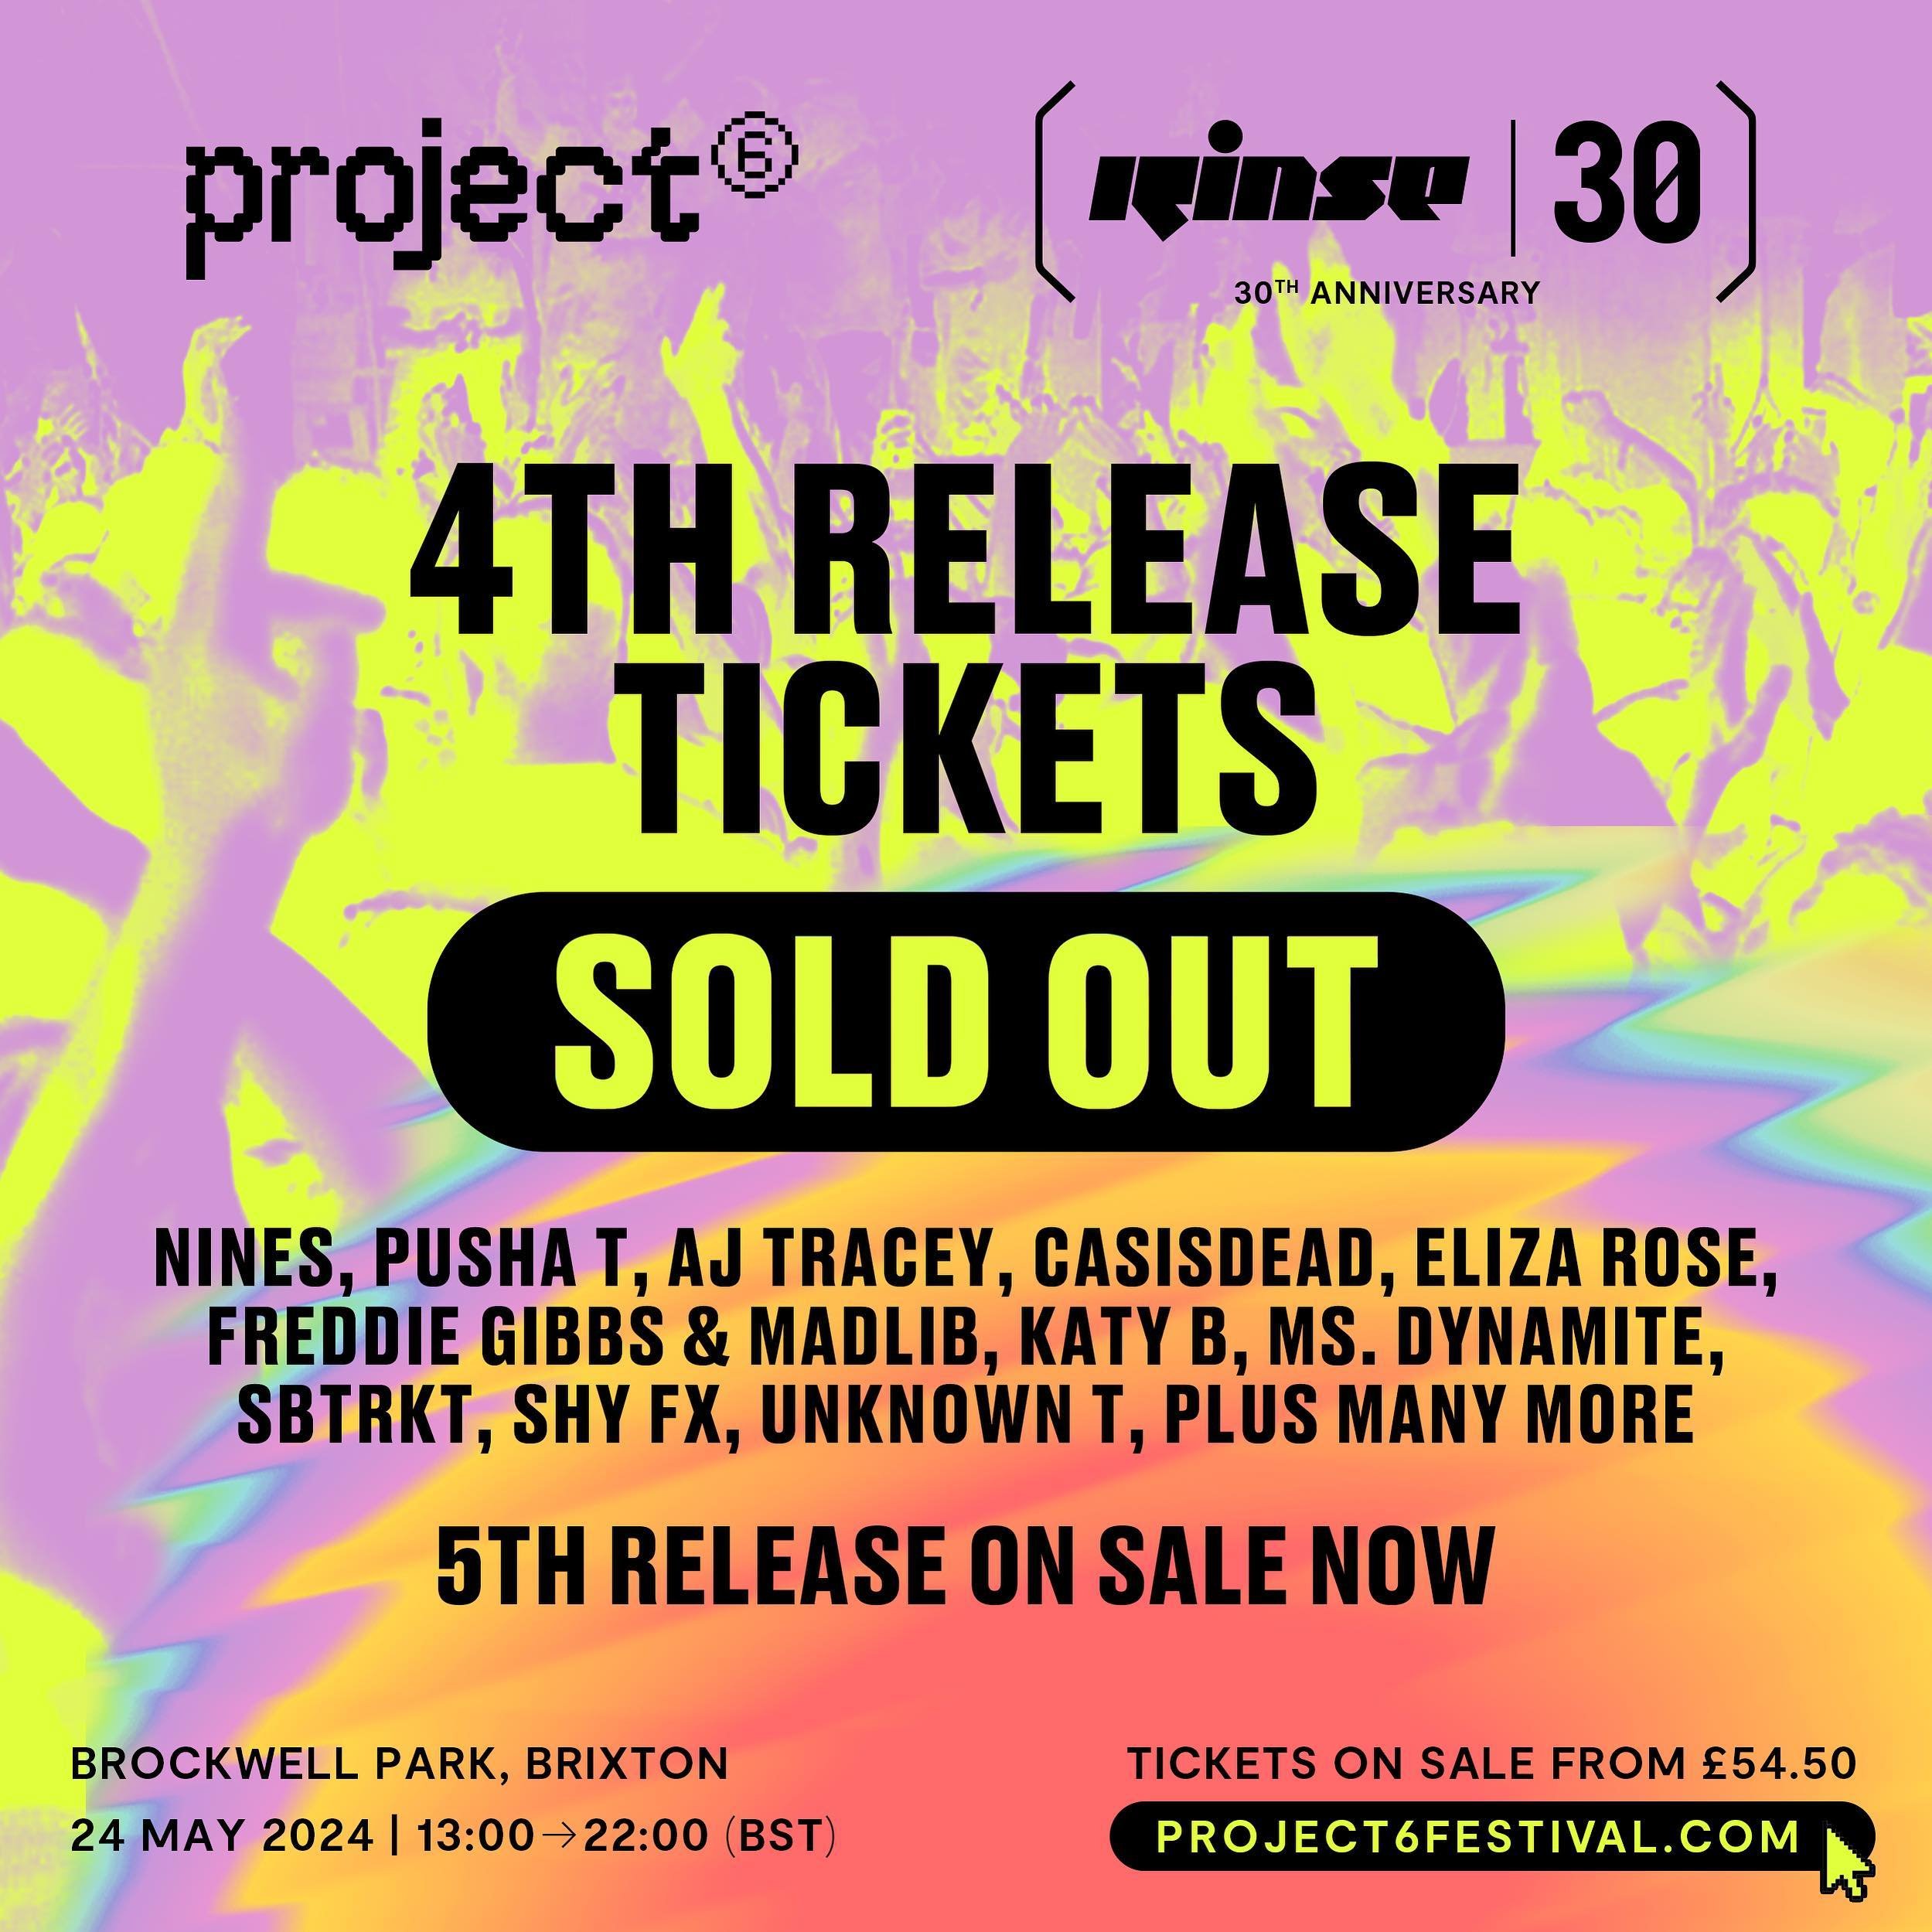 TIER 4 TICKETS SOLD OUT ❌

Don&rsquo;t say we didn&rsquo;t warn you! Project 6 | Rinse 30 tickets are a hot topic right now and we&rsquo;re the first to bring the festival heat to London, so are you really gonna miss this&nbsp;chance?&nbsp;🔥 

FINAL